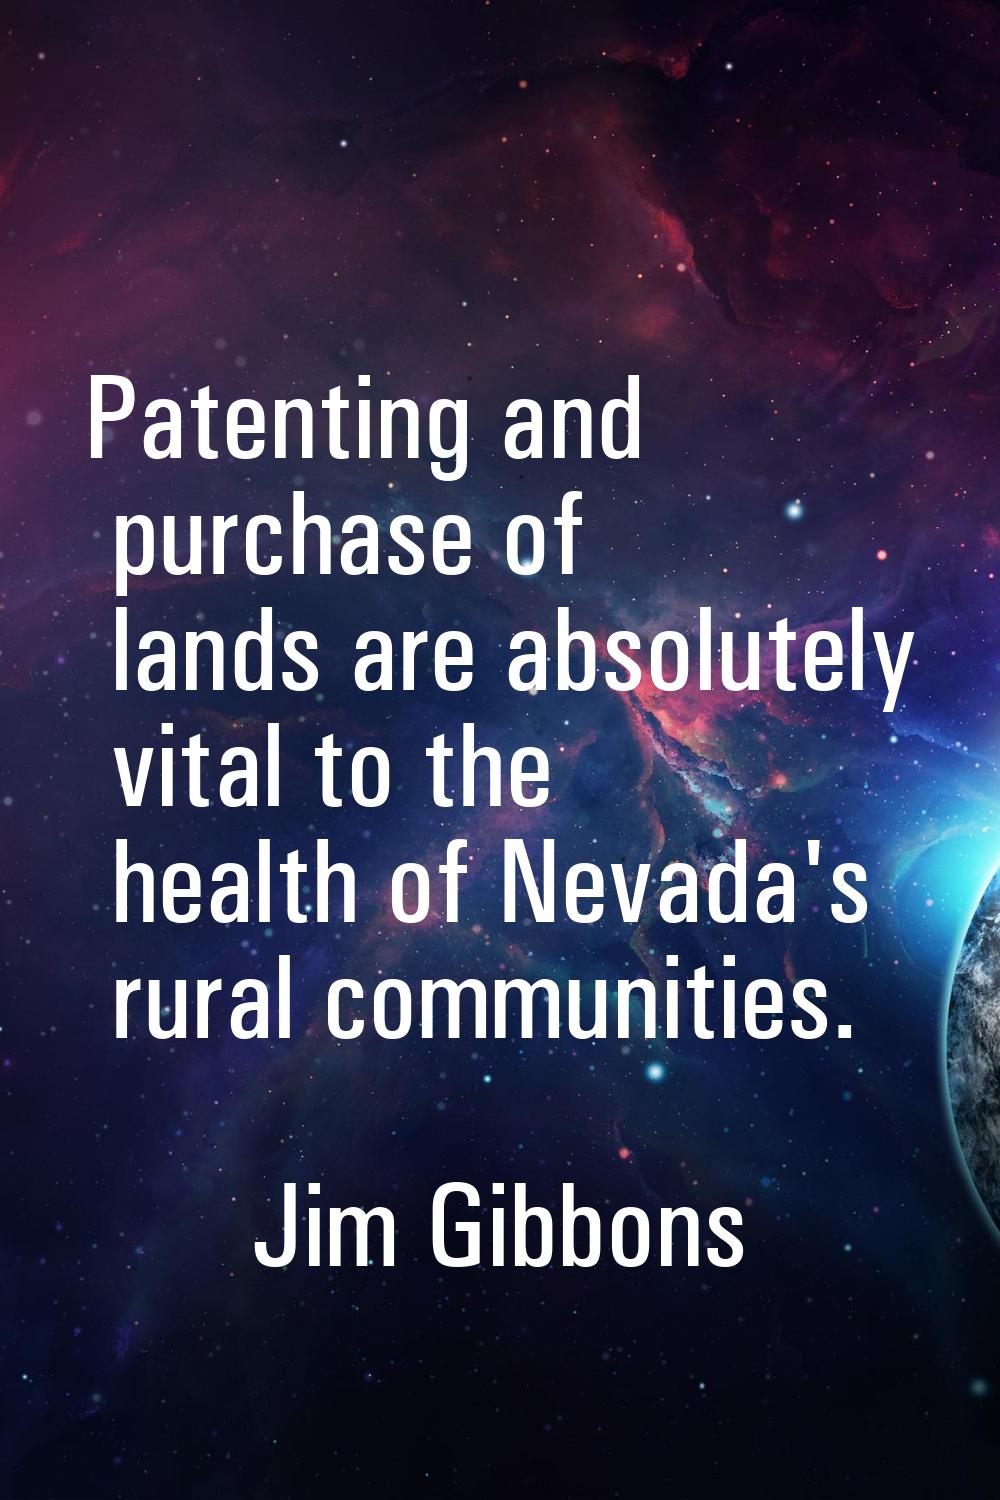 Patenting and purchase of lands are absolutely vital to the health of Nevada's rural communities.